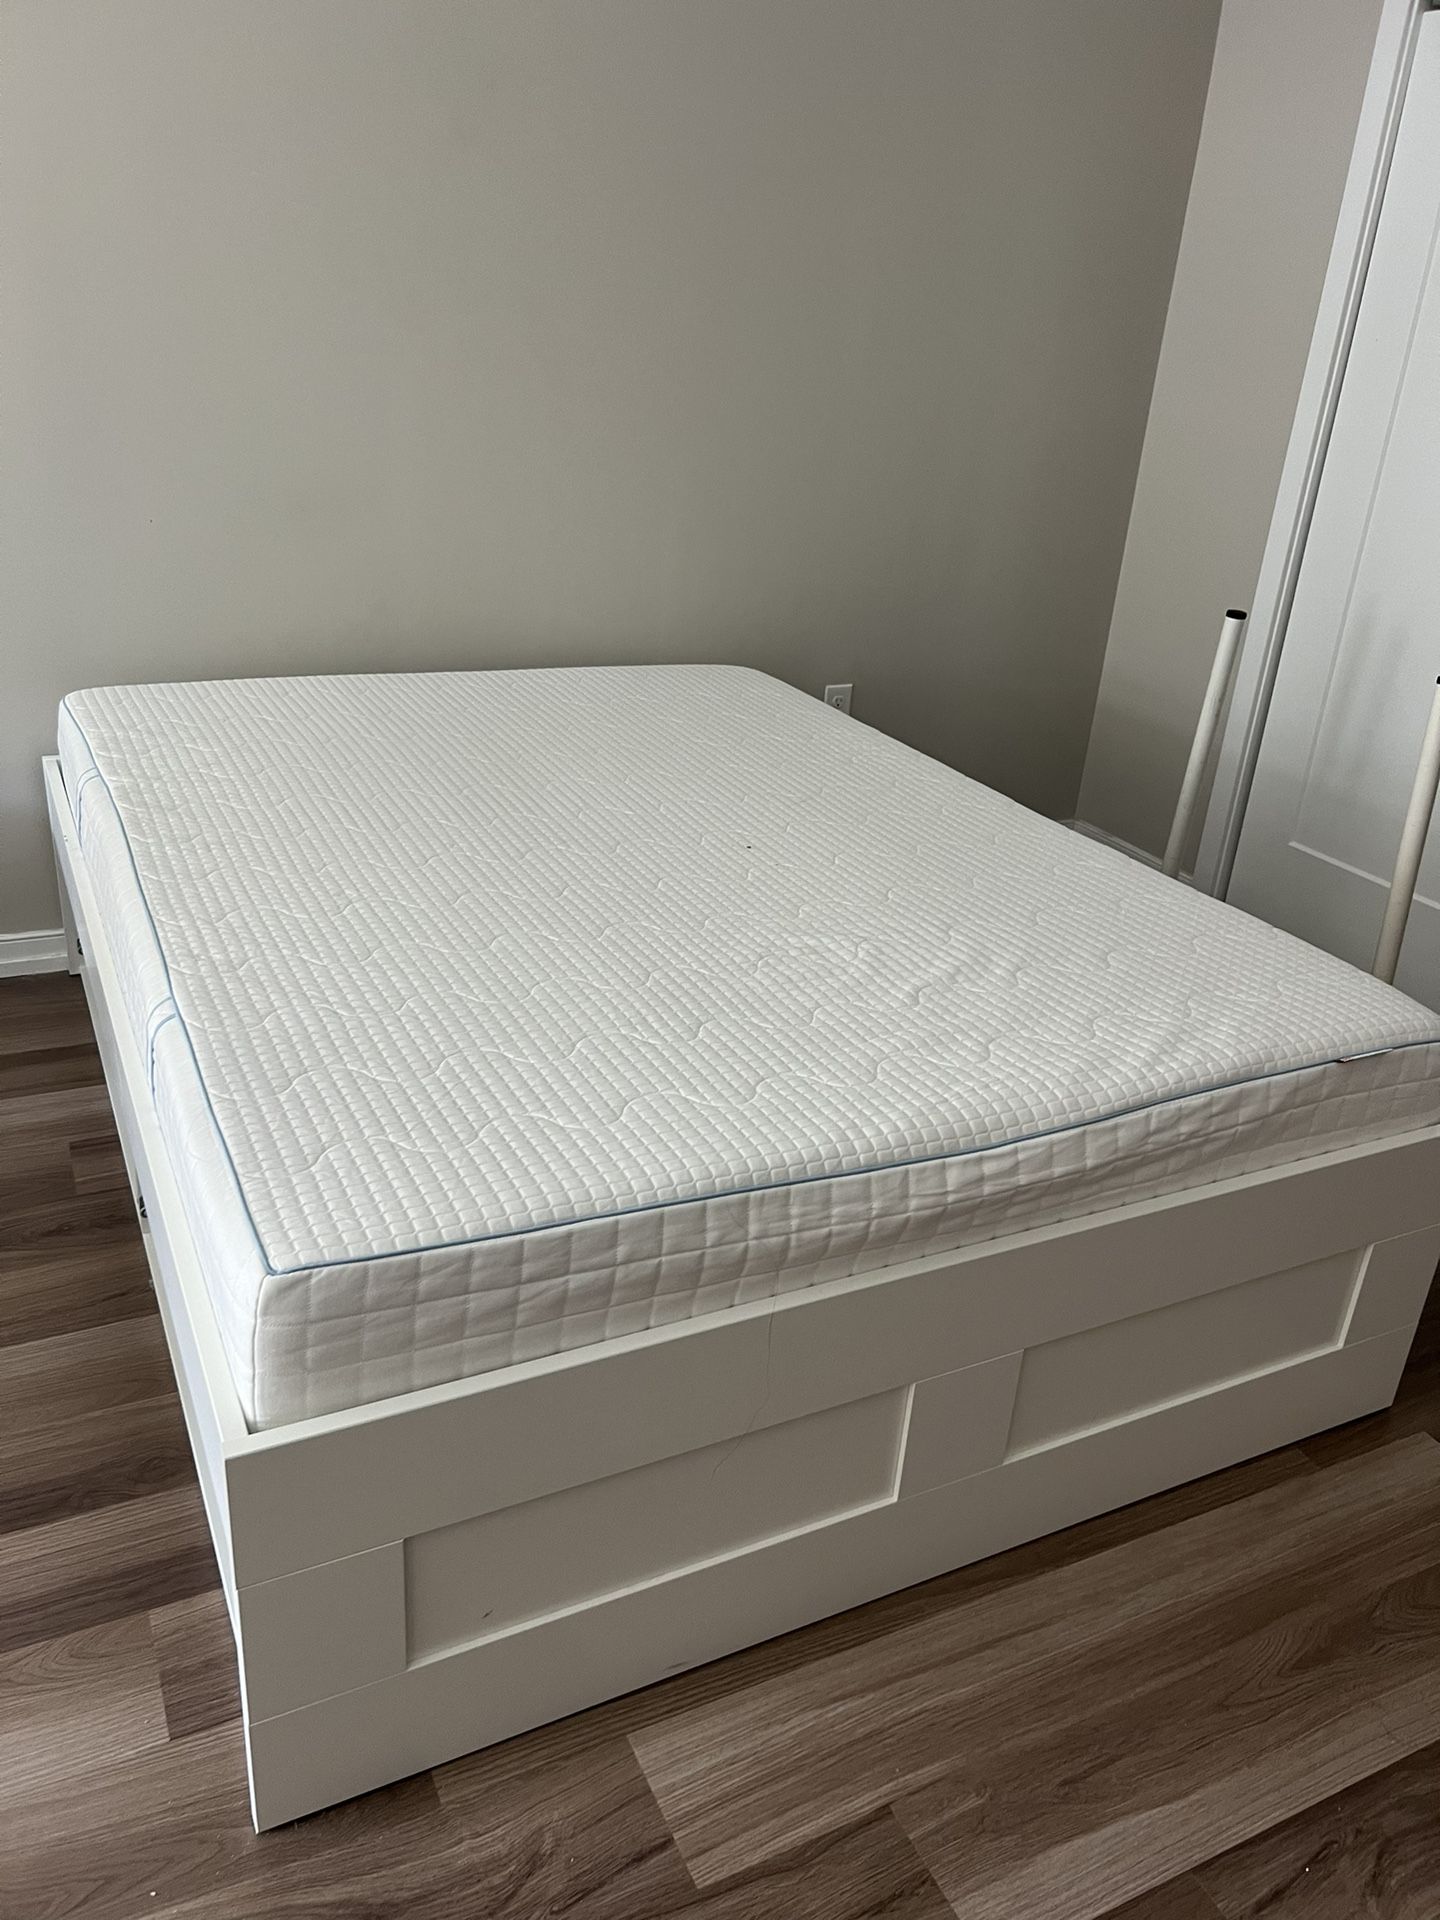 Queen Size Bed Frame With Drawer And Mattress $280